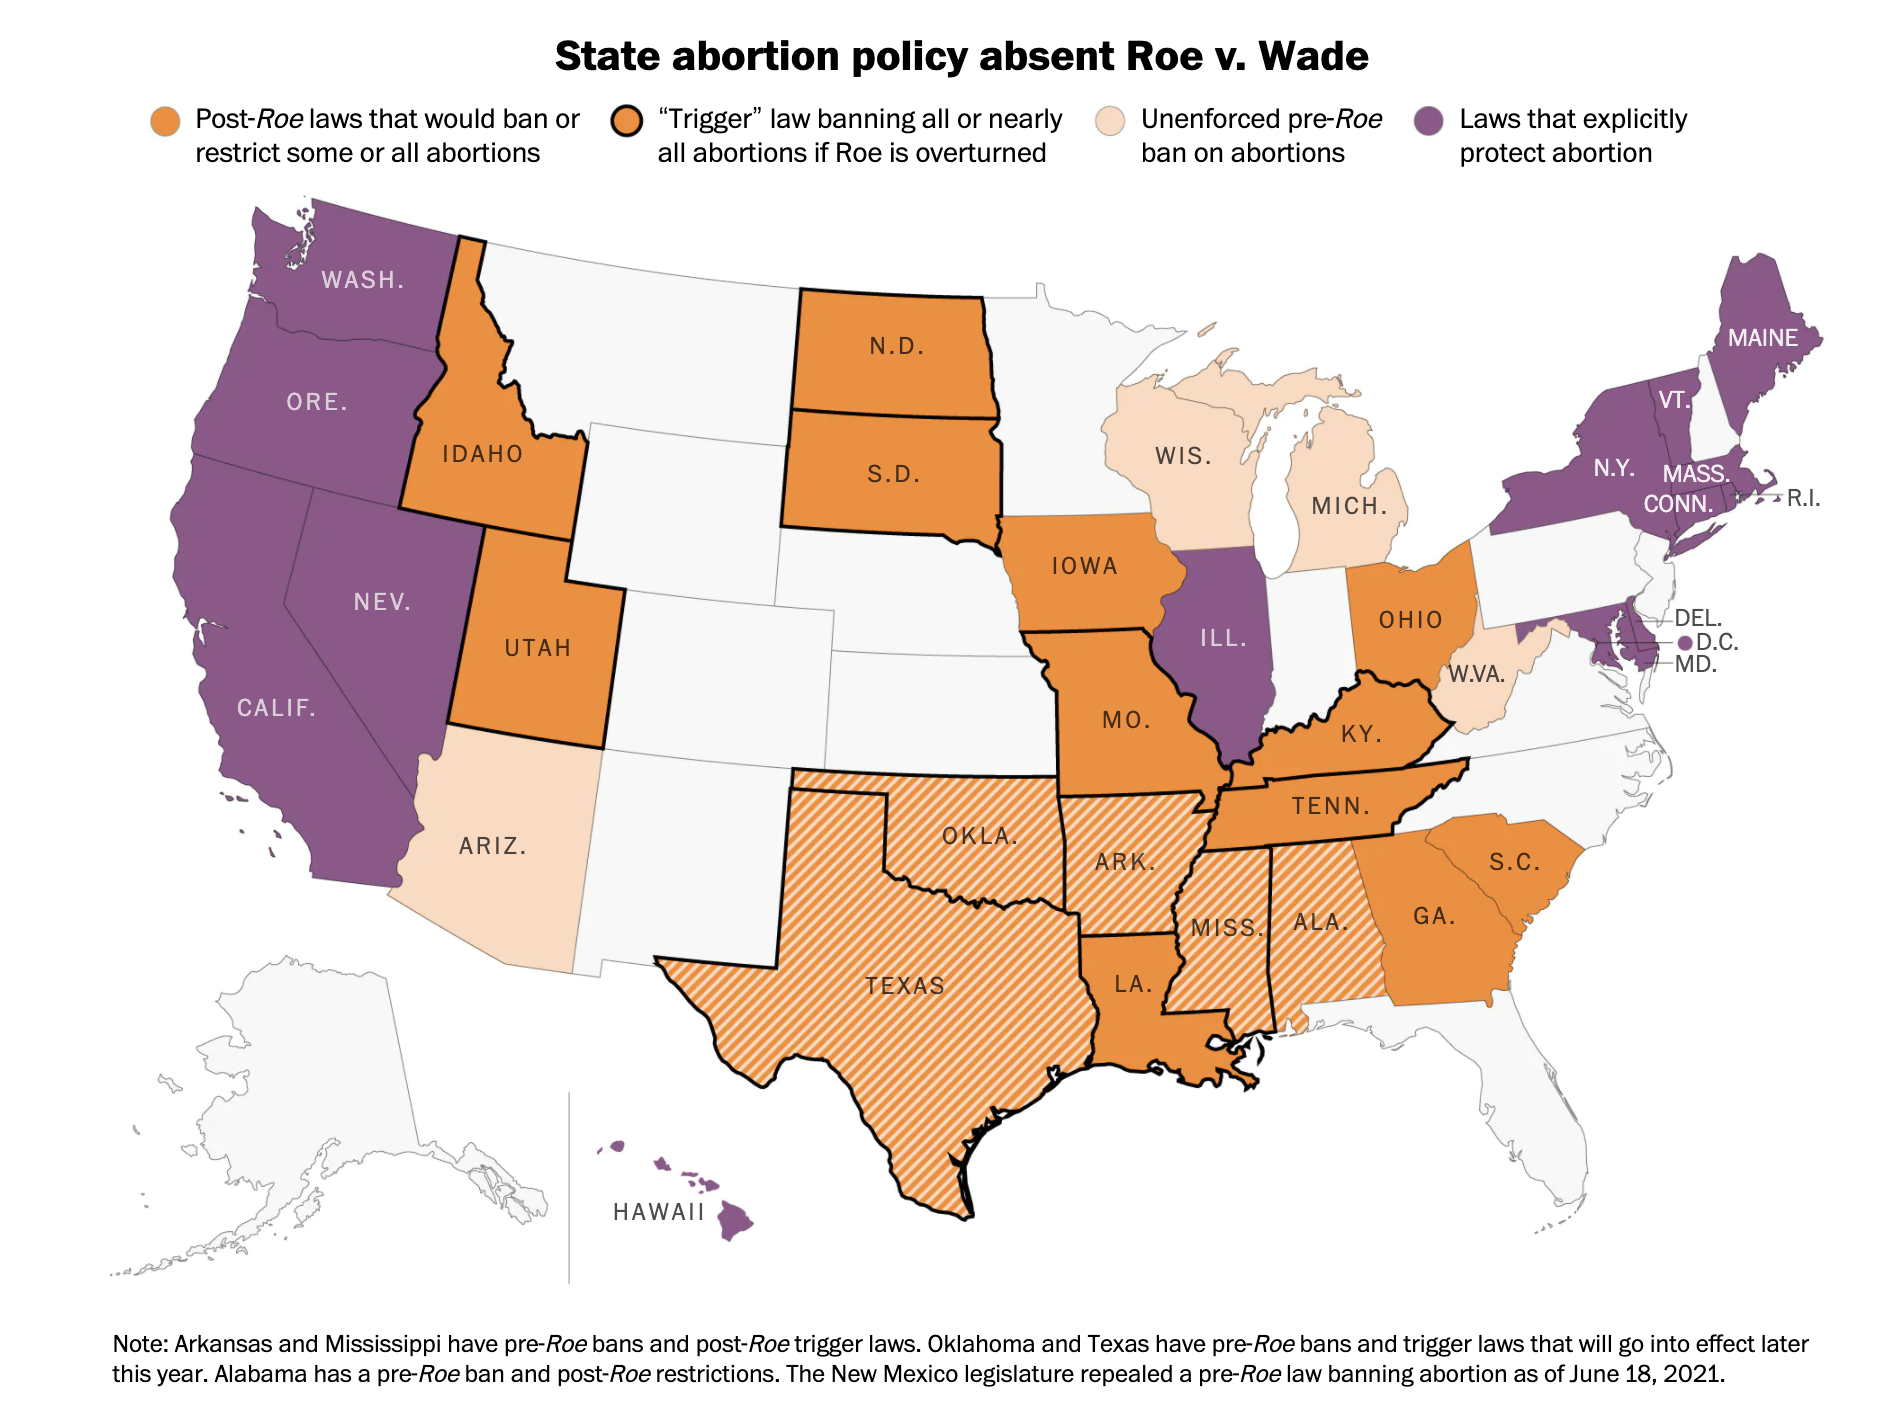 "Abortion was legalized in 1973 But over the last few decades, access to the procedure has increasingly declined in more than a dozen states around the country that have since passed laws making it more difficult for people to get an abortion. The most restrictive law to date is in Texas, a state with nearly 30 million people. The new law that came into effect in September outlaws most abortions once a fetal heartbeat can be detected, which is usually around six weeks into a pregnancy. There are exceptions for medical emergencies, though those are not clearly defined in the law, and no exceptions for pregnancies resulting from rape or incest." 